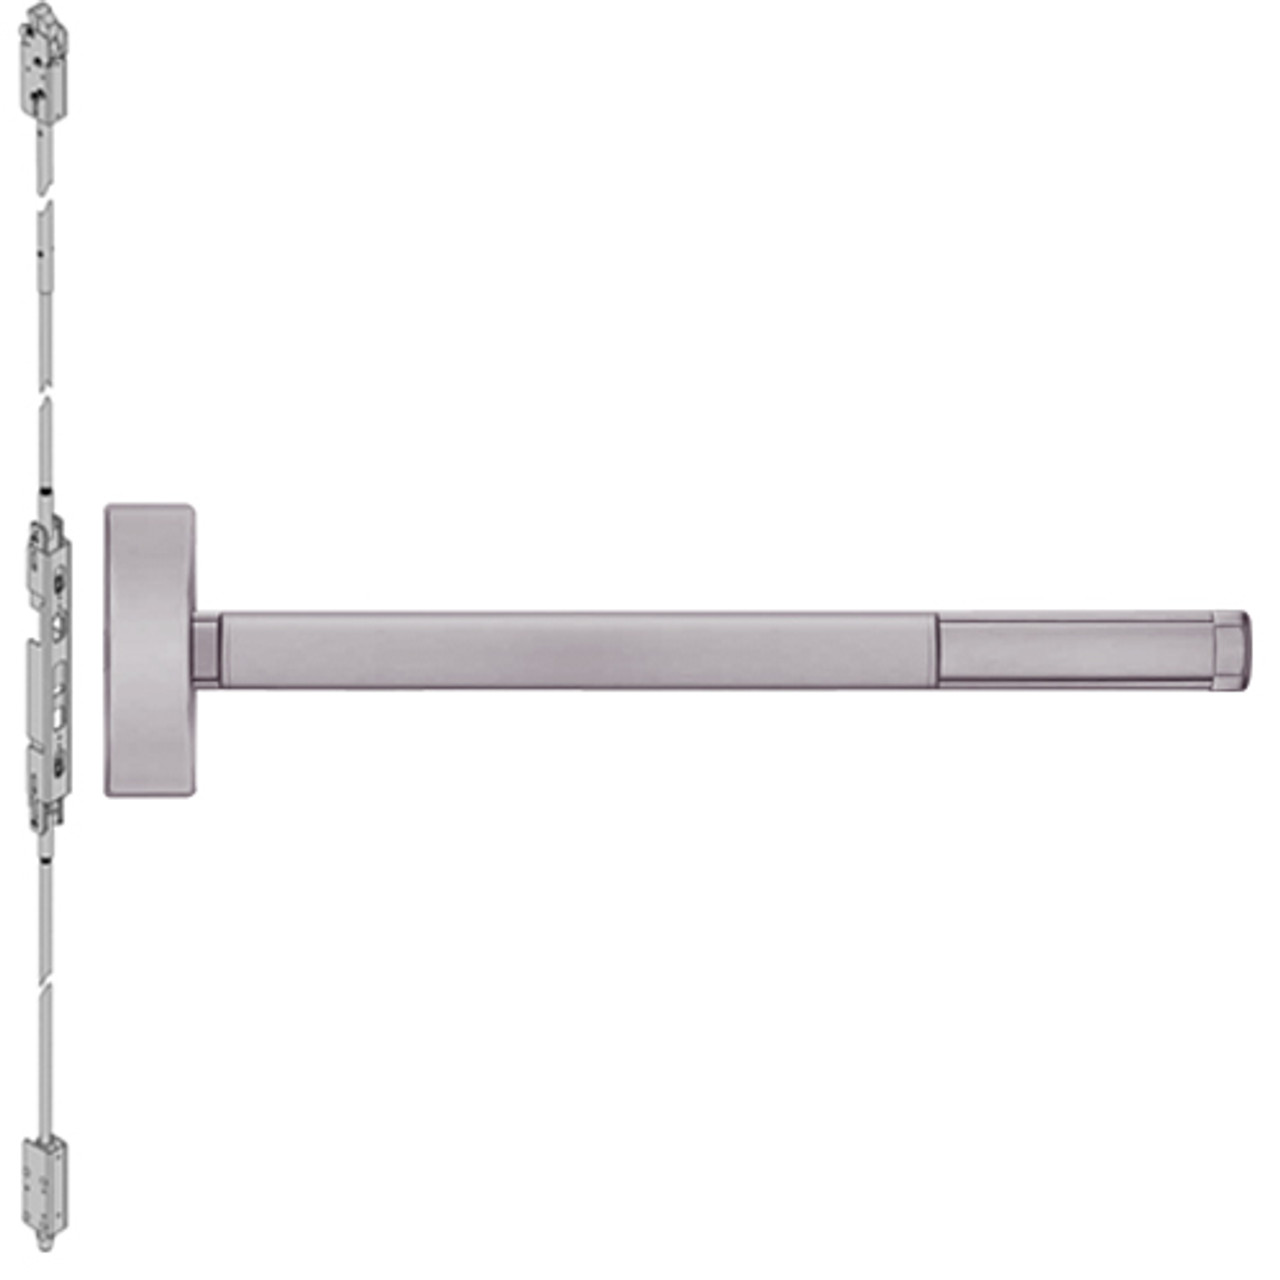 FL2805-630-36 PHI 2800 Series Fire Rated Concealed Vertical Rod Exit Device Prepped for Key Controls Thumb Piece in Satin Stainless Steel Finish